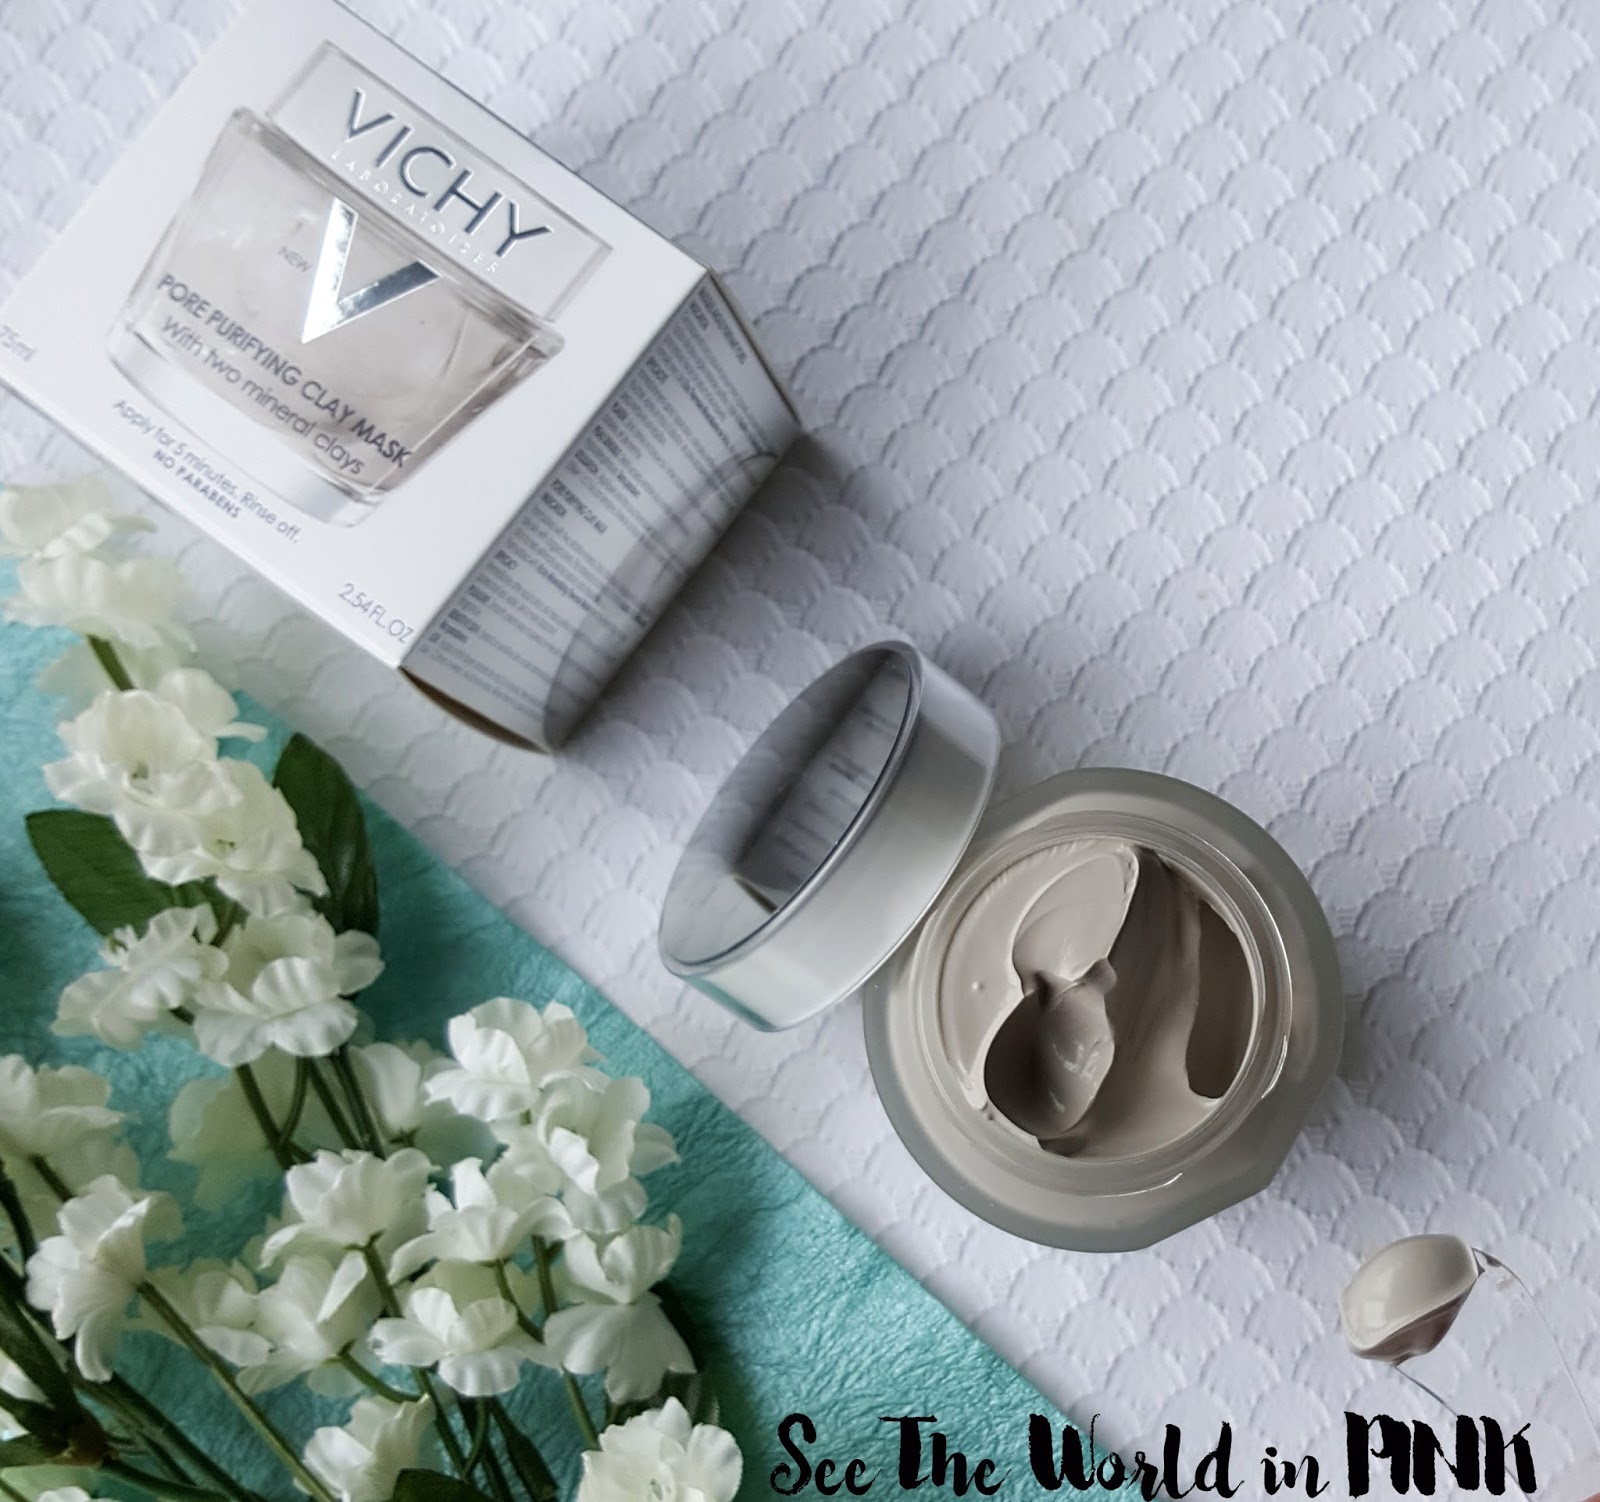 Mask Wednesday - Vichy Mineral Masks Pore Purifying Clay Mask